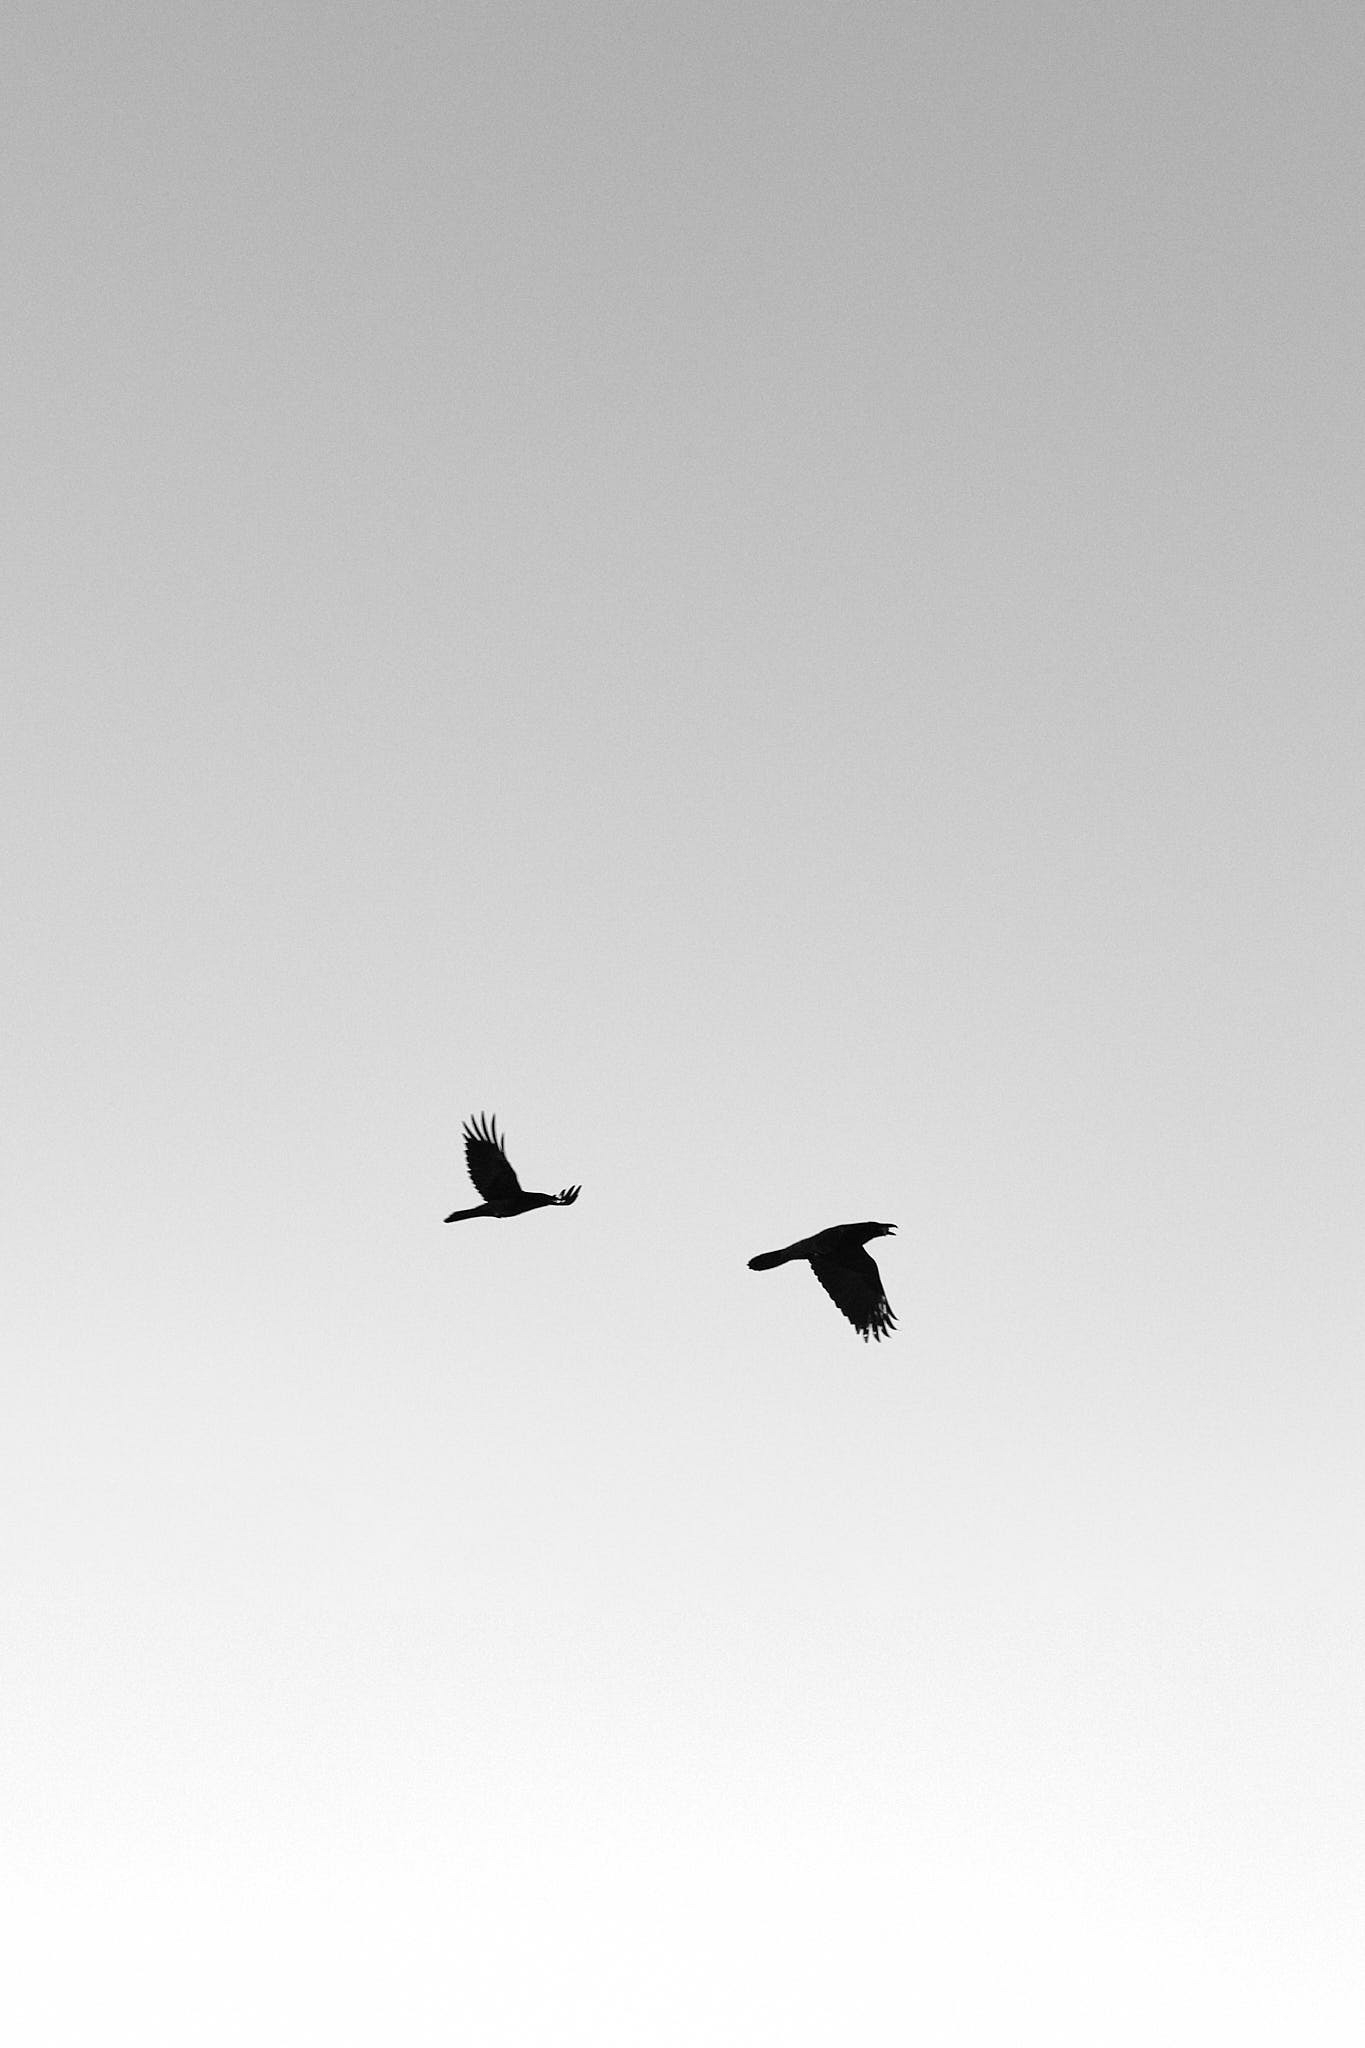 Two ravens flying against a blank sky